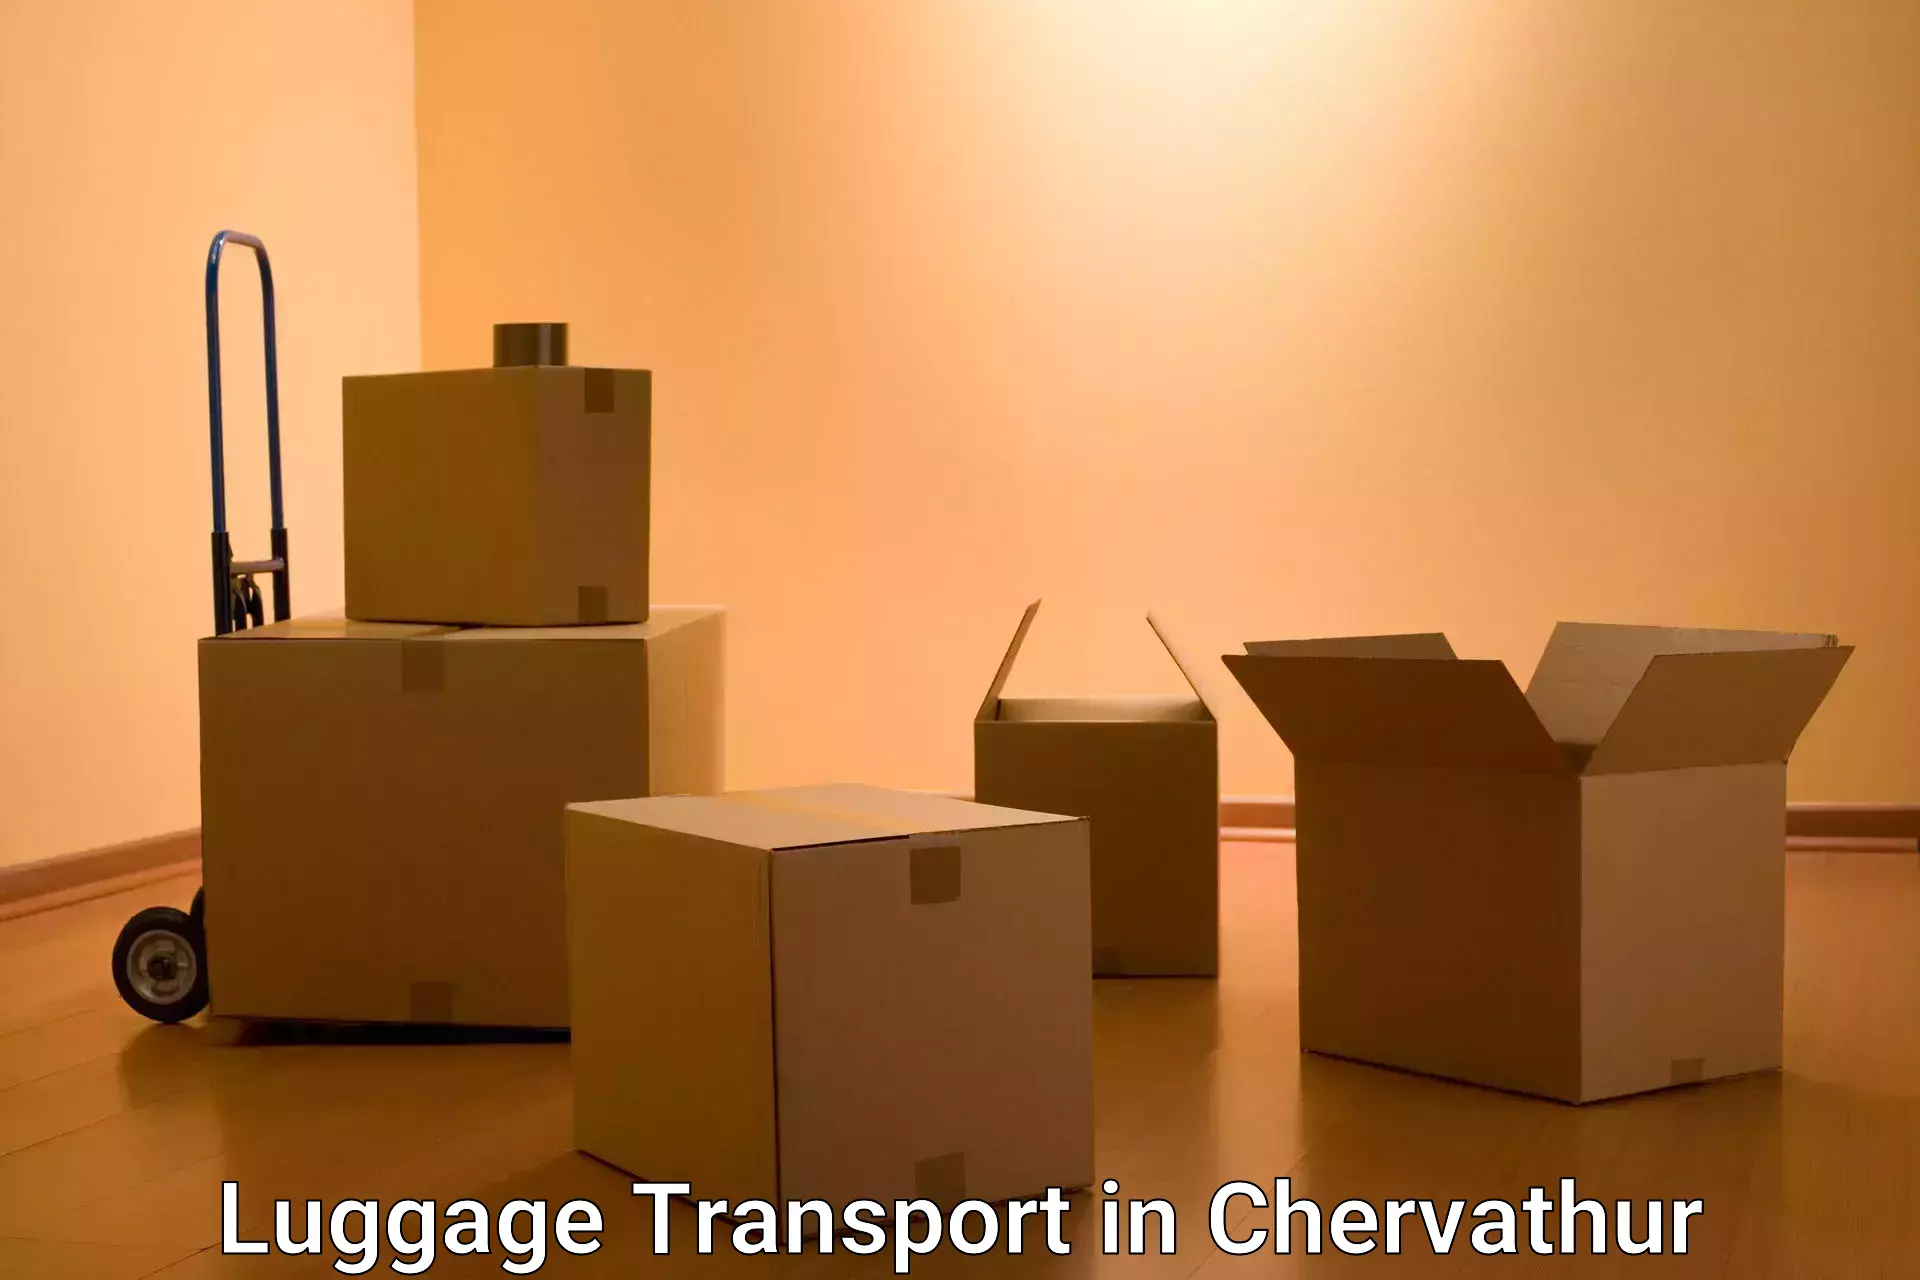 Luggage transport deals in Chervathur